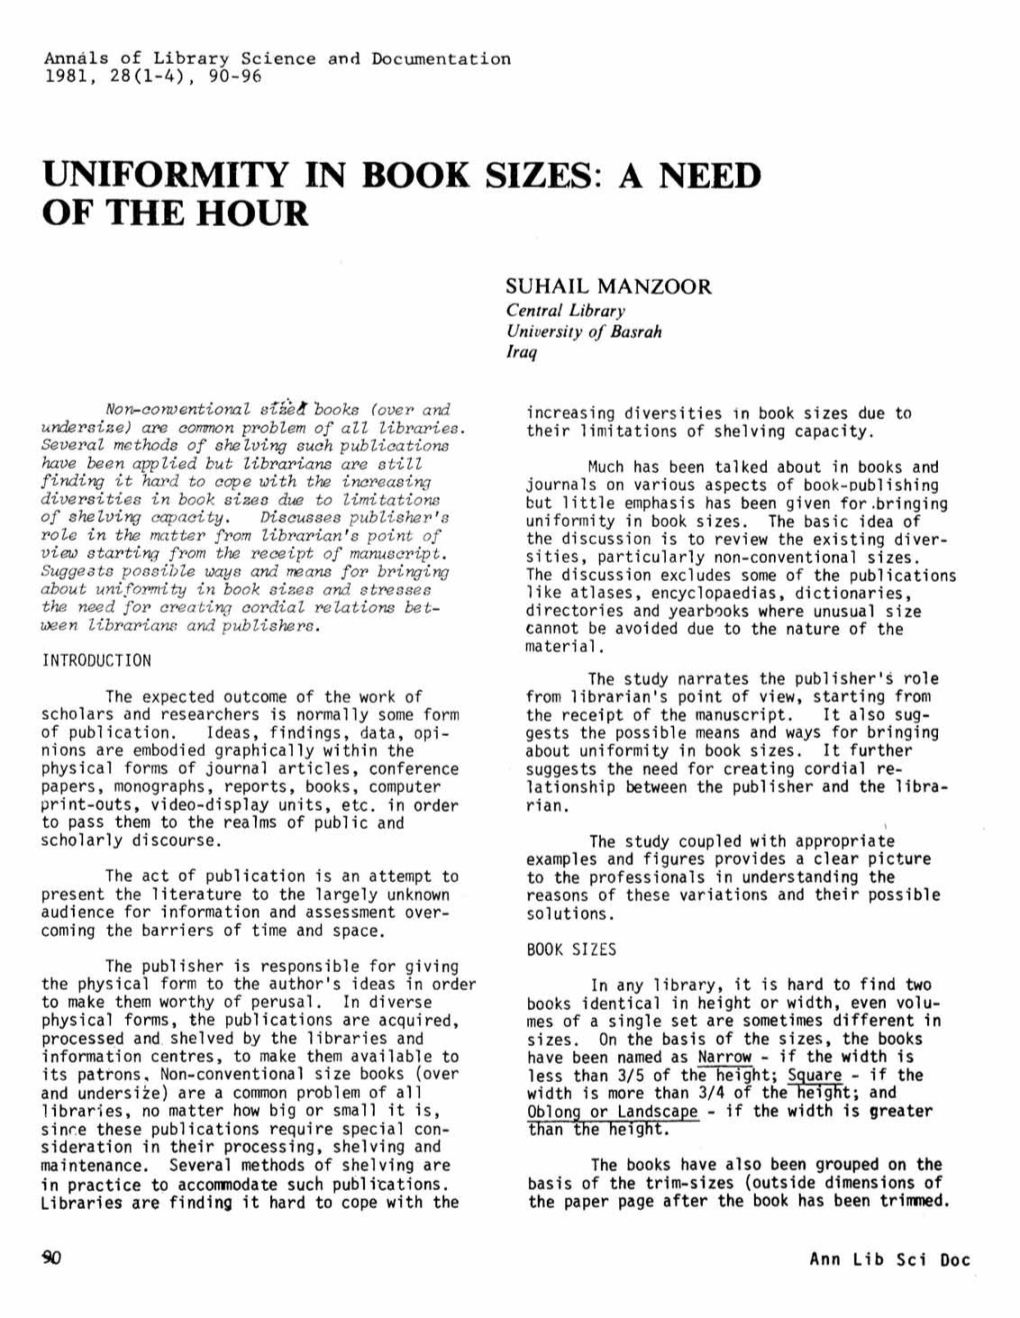 Uniformity in Book Sizes: a Need Ofthehour